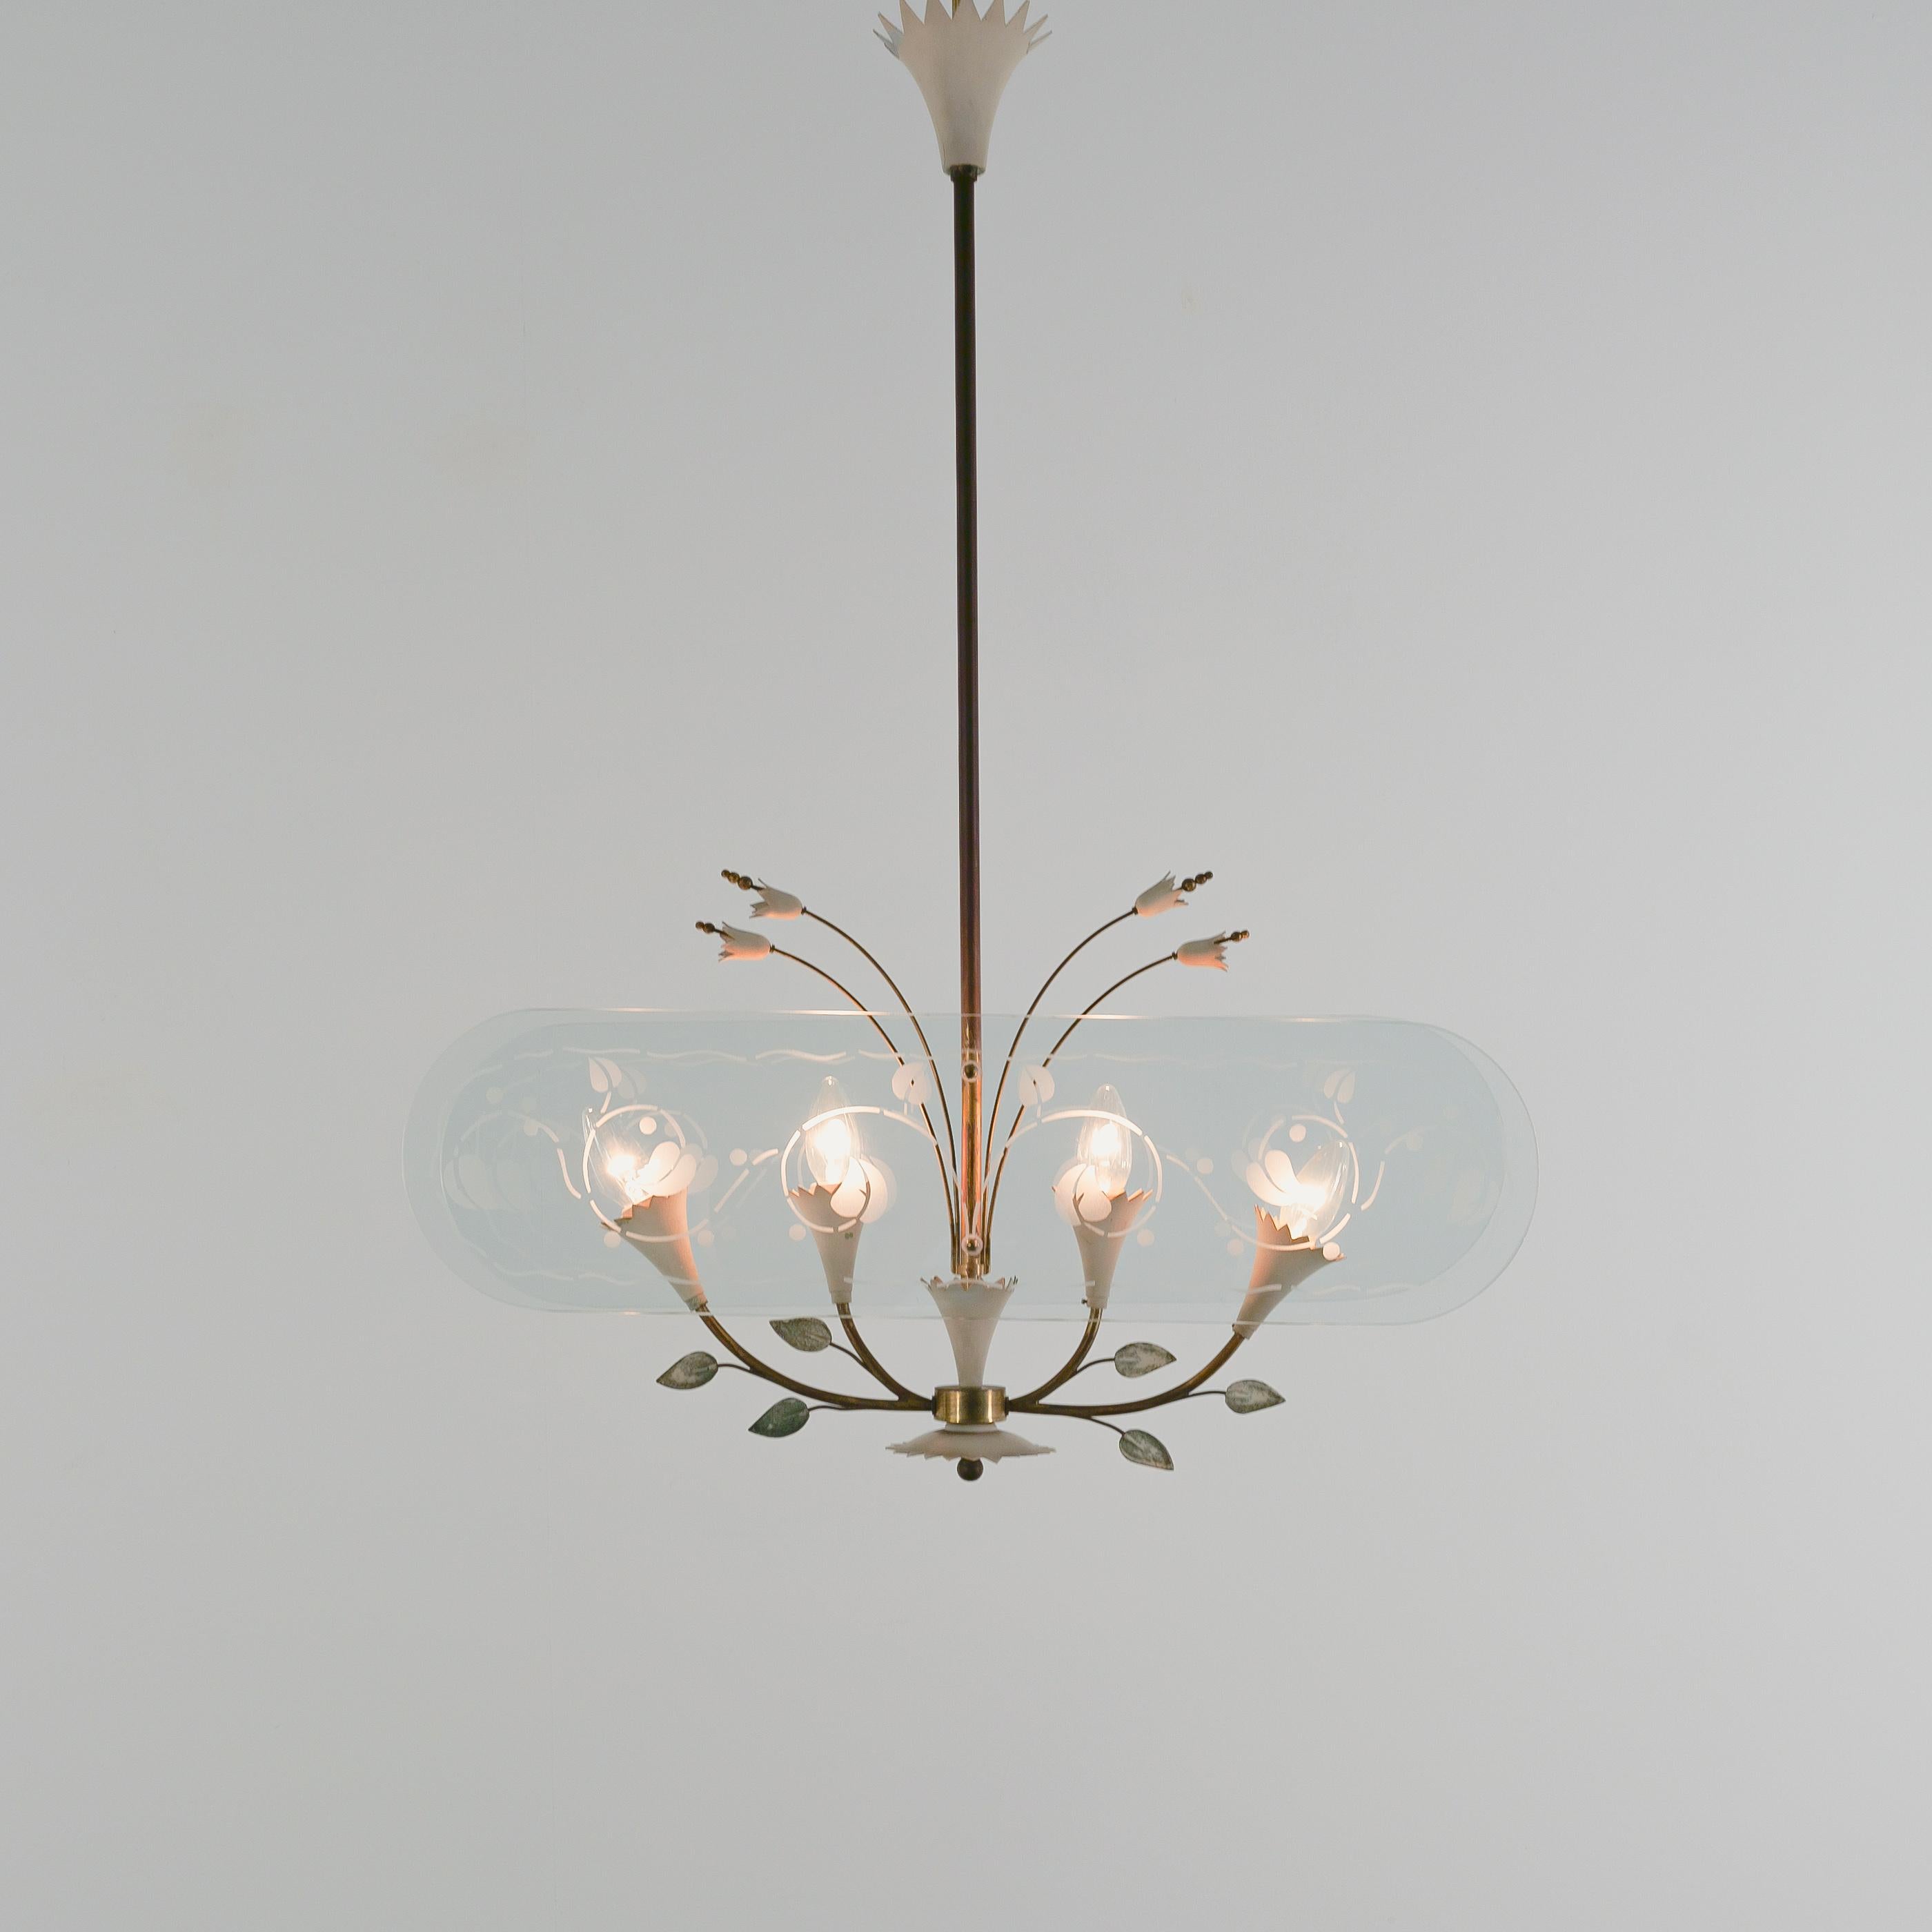 Pietro Chiesa Chandelier Floral Glass with Etched Details Italy, 1950 For Sale 5